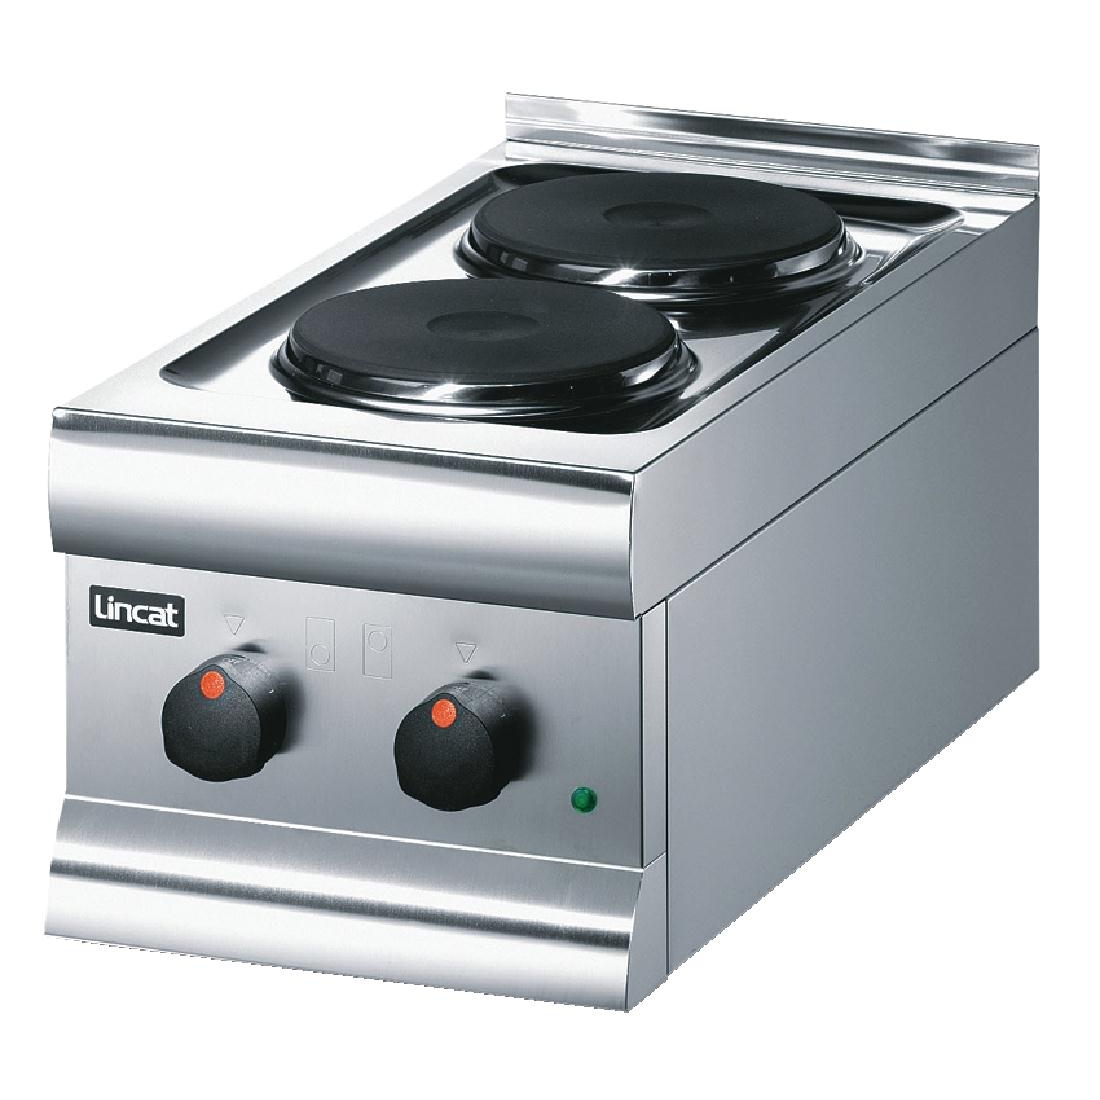 Lincat Silverlink 600 Electric Boiling Ring HT3